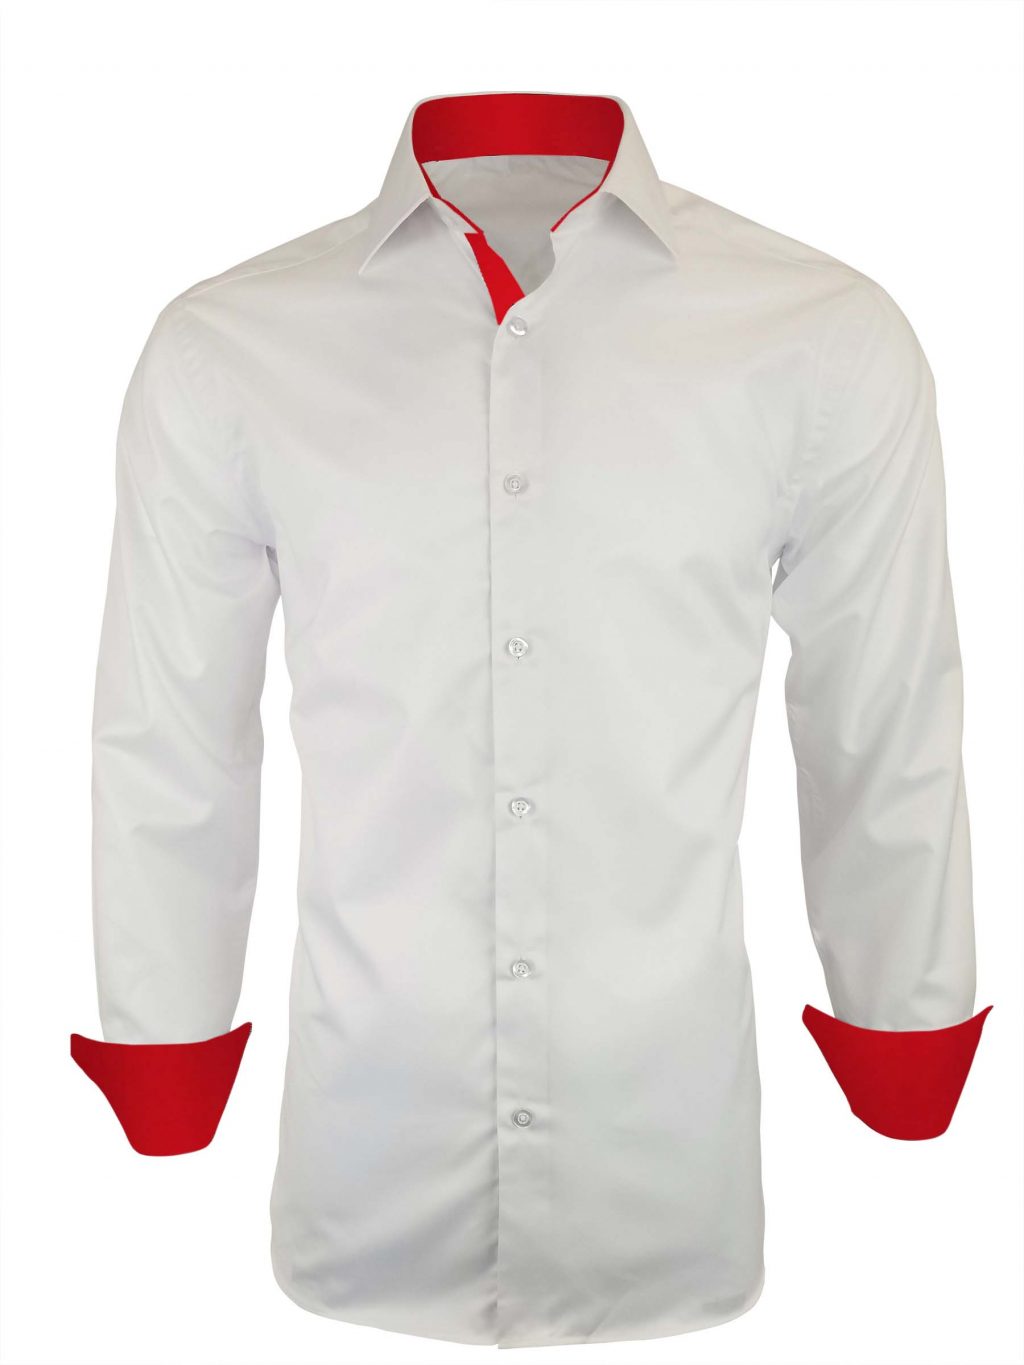 Men's White with Red PC Contrast Shirt - Long Sleeve - Uniform Edit